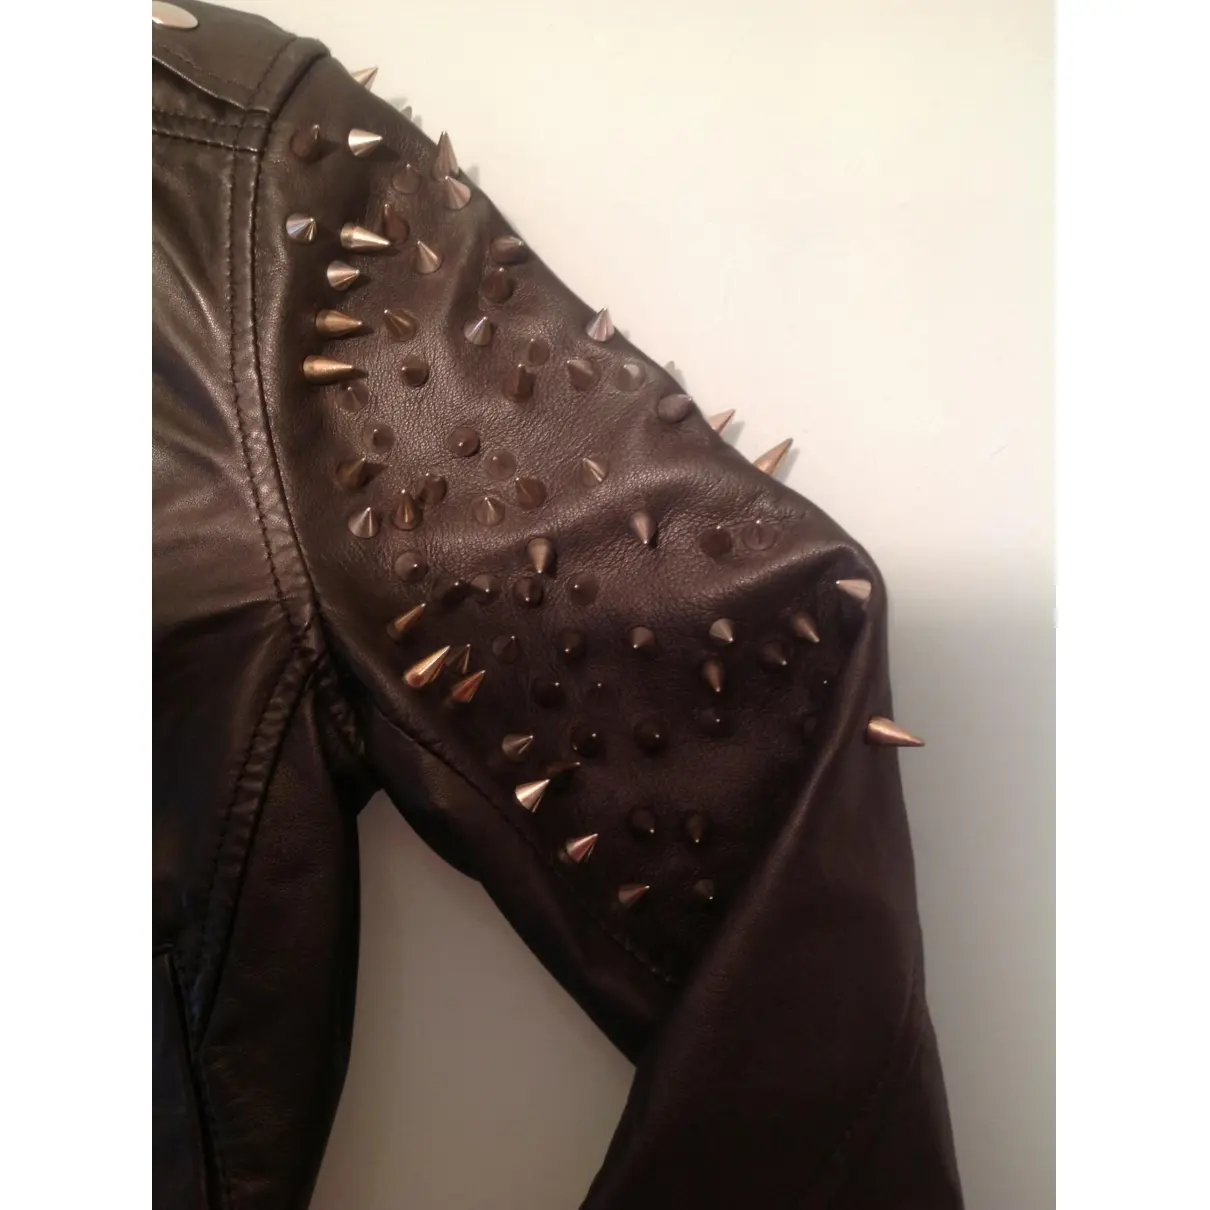 Blk Dnm Leather jacket for sale